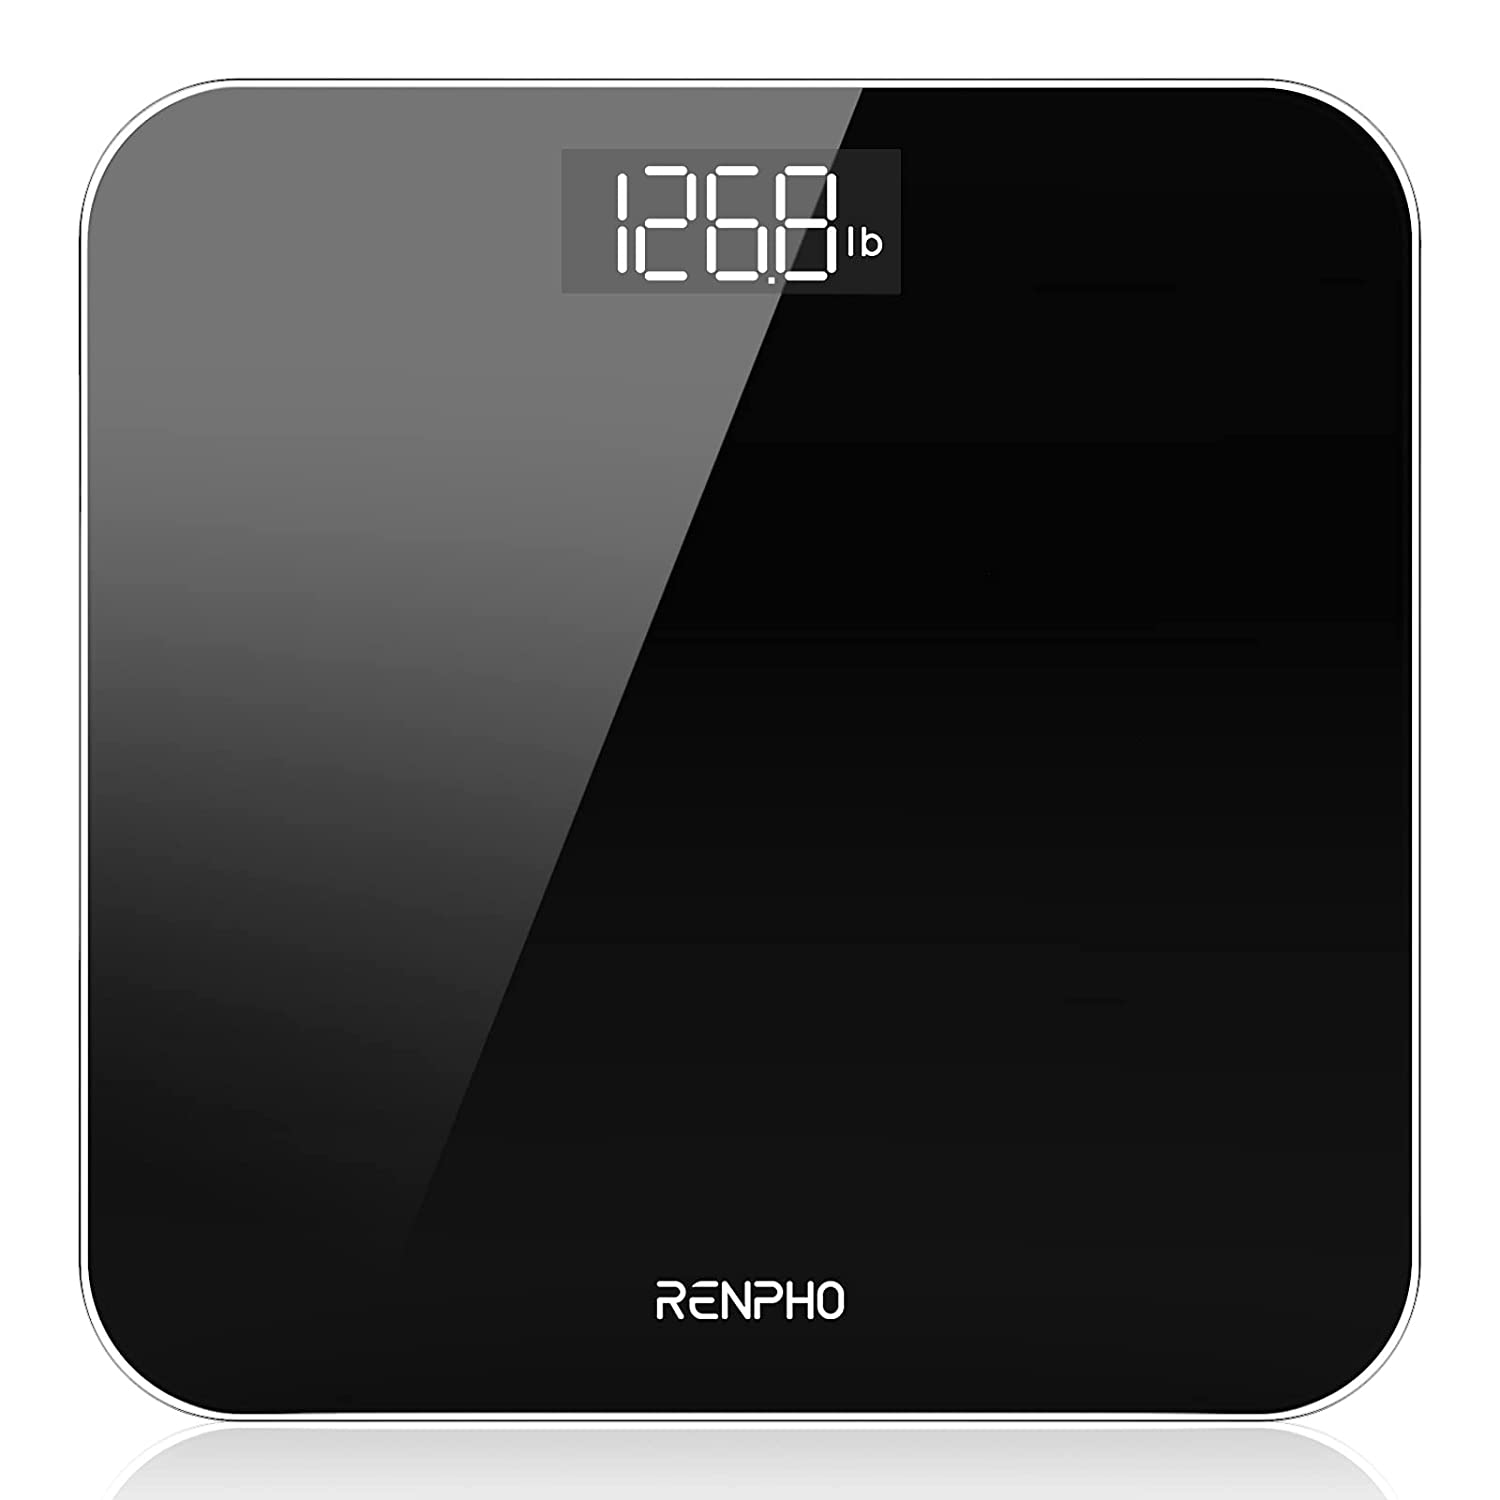 Photo 1 of RENPHO Digital Bathroom Scale Highly Accurate Body Weight Scale with Lighted LED Display Round Corner Design 400 lb Black